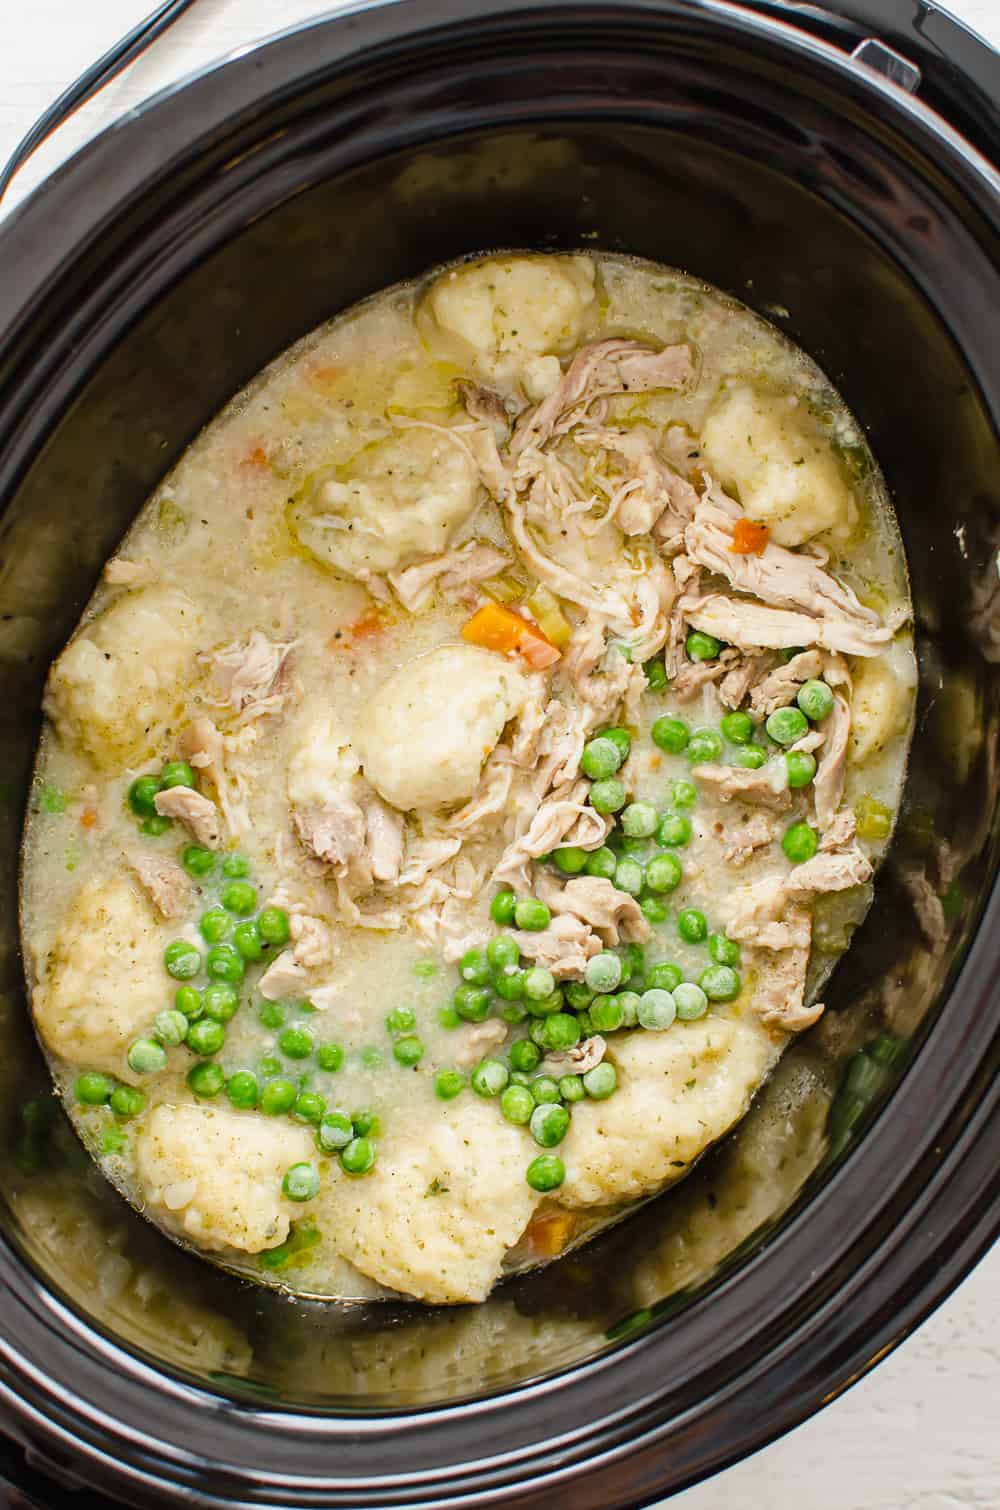 Frozen peas and shredded chicken being stirred in a slow cooker for chicken and dumplings.